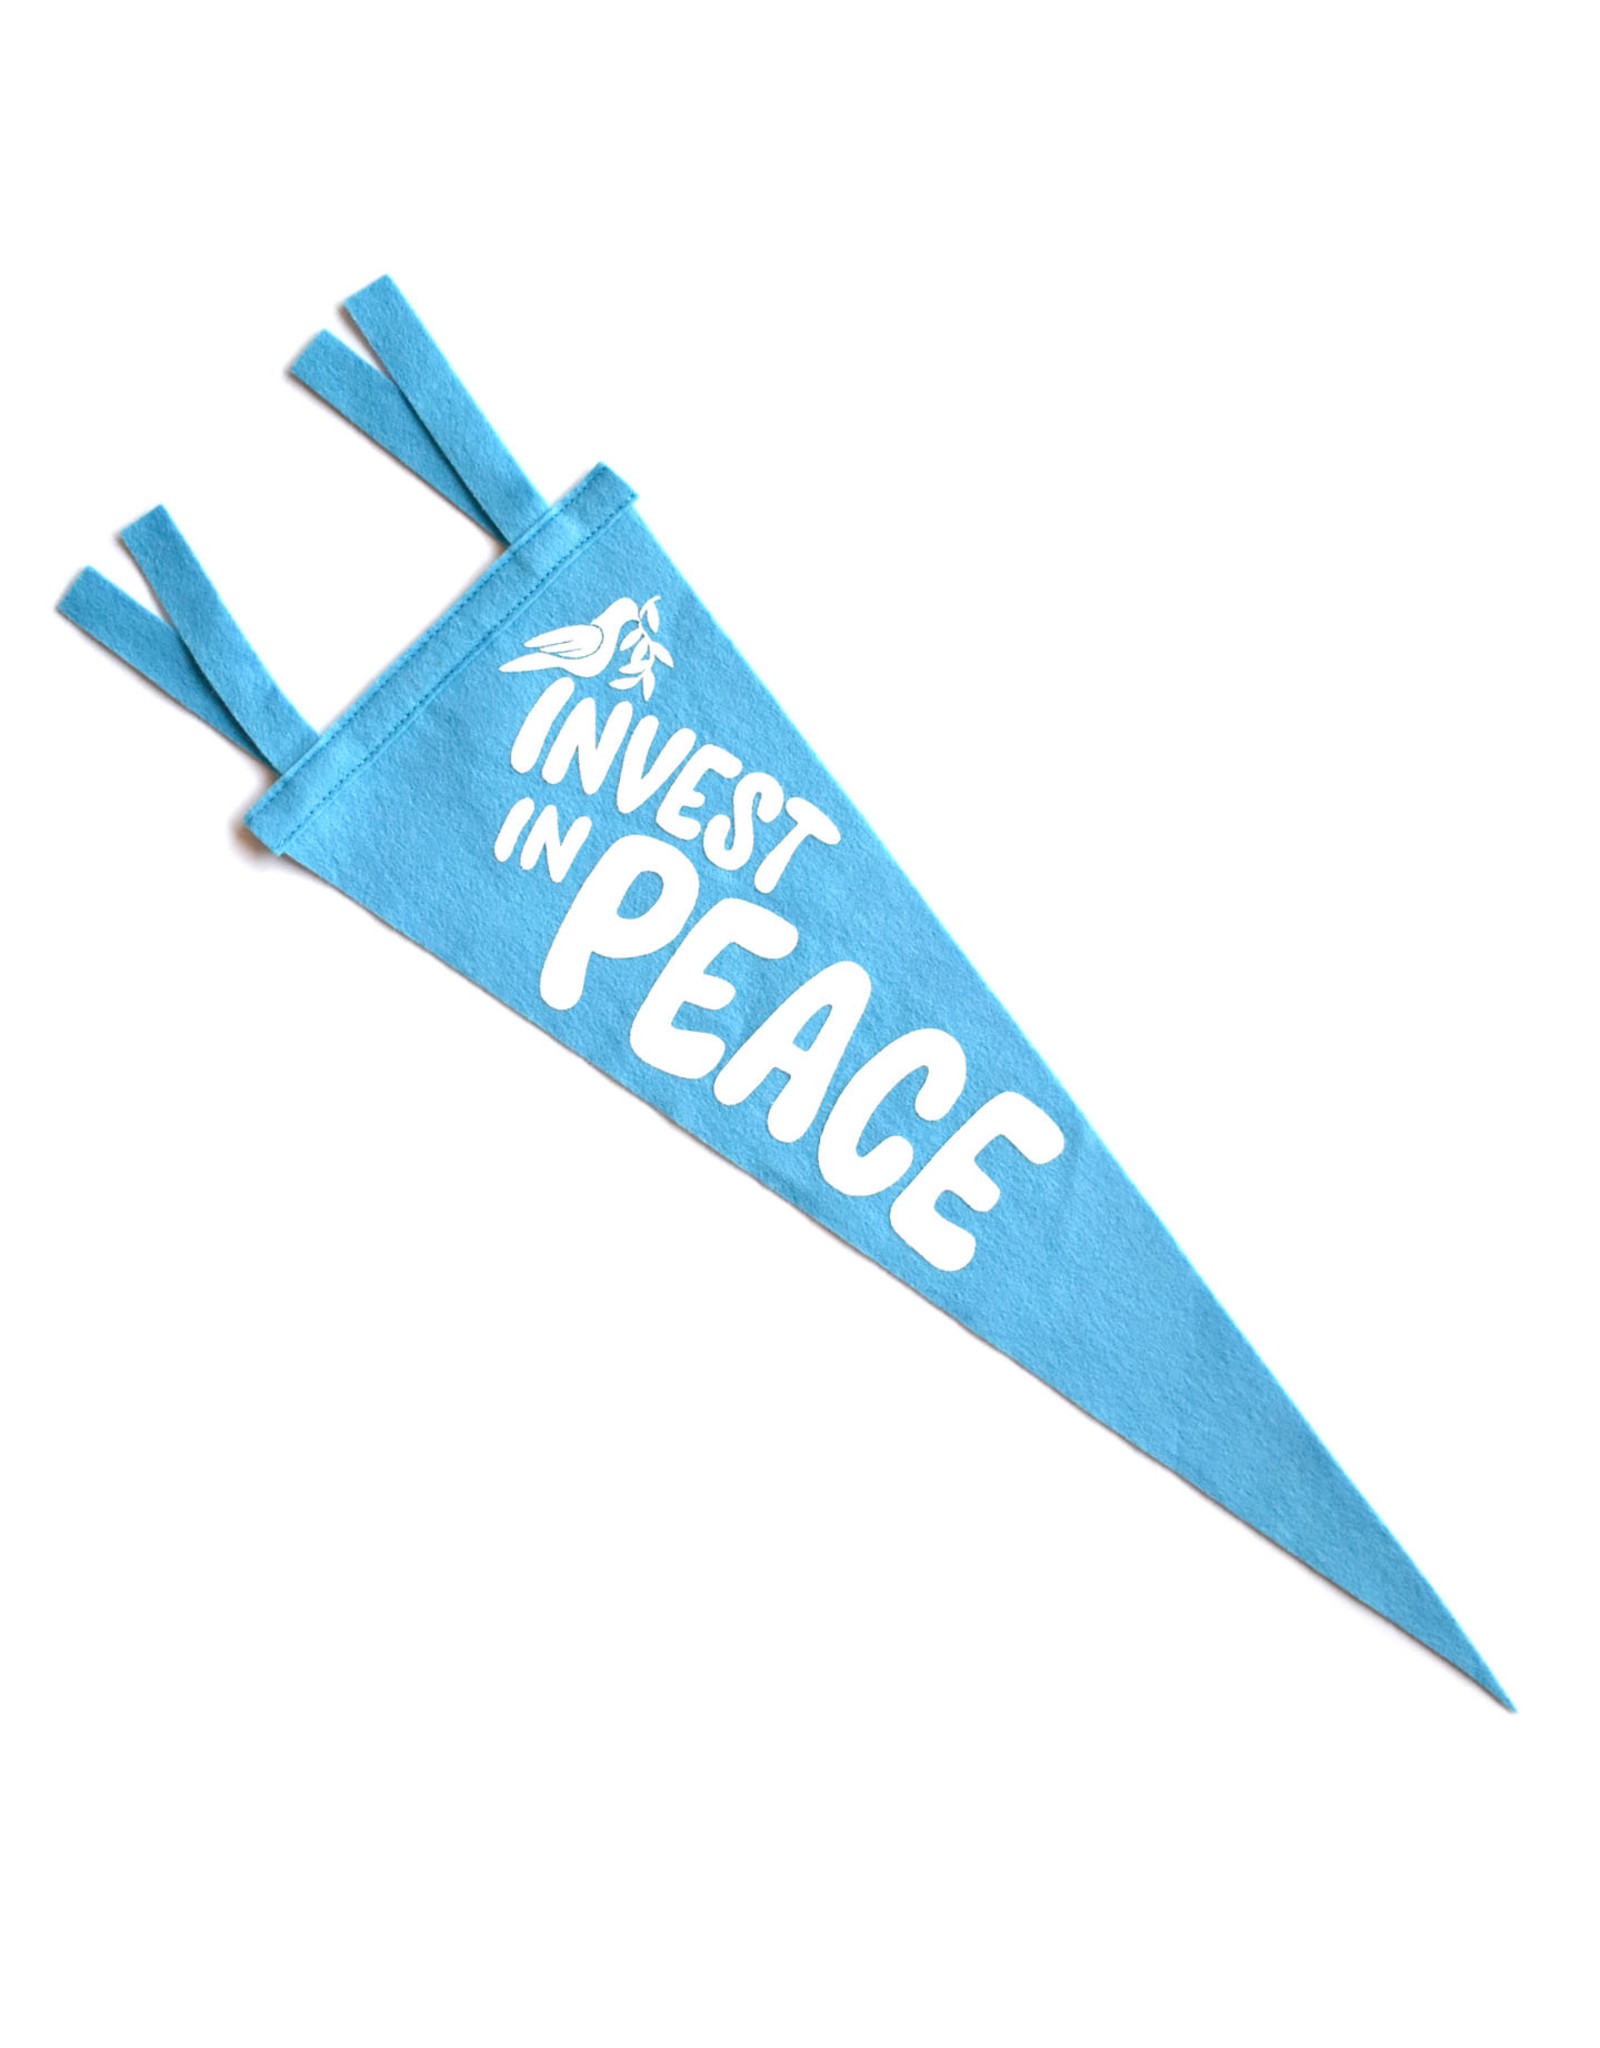 Invest in Peace Pennant